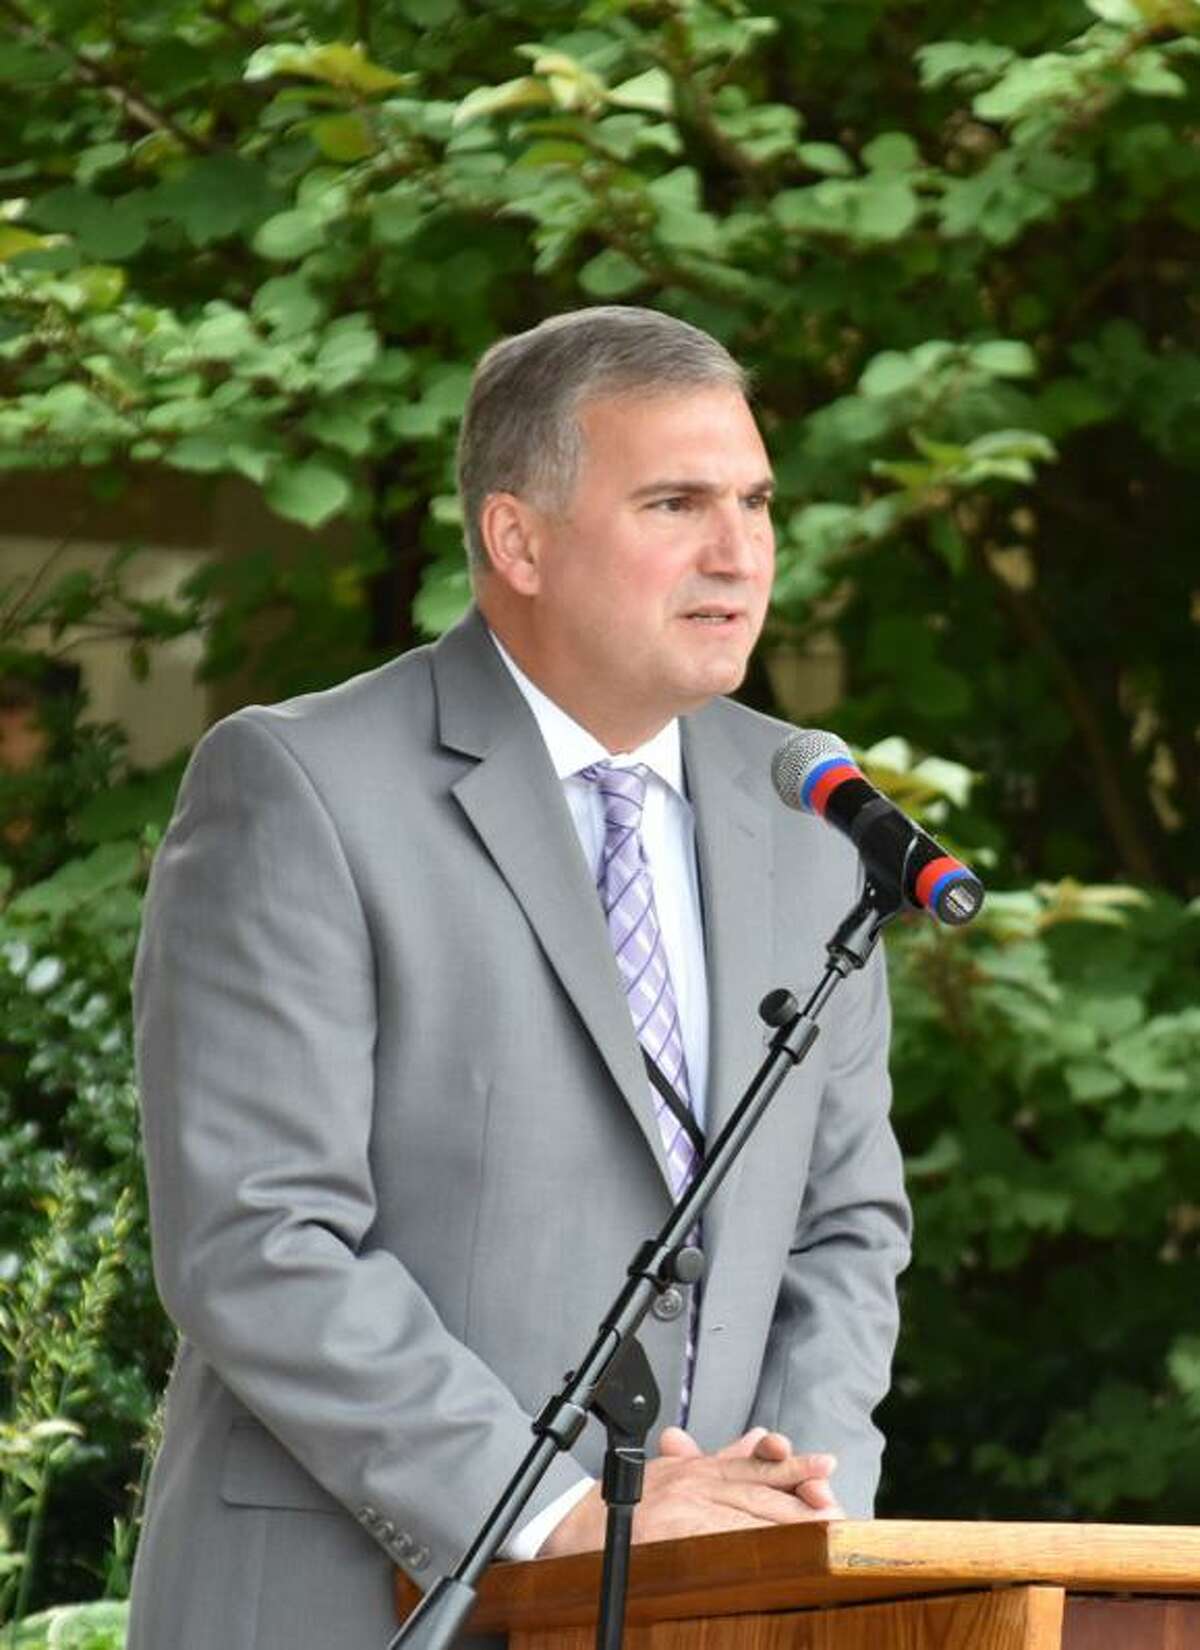 Superintendent of Schools Dr. Bryan Luizzi speaks at New Canaan High School Oct. 1 during a ceremony proclaiming New Canaan Domestic Violence and Teen Dating Violence Month in New Canaan/